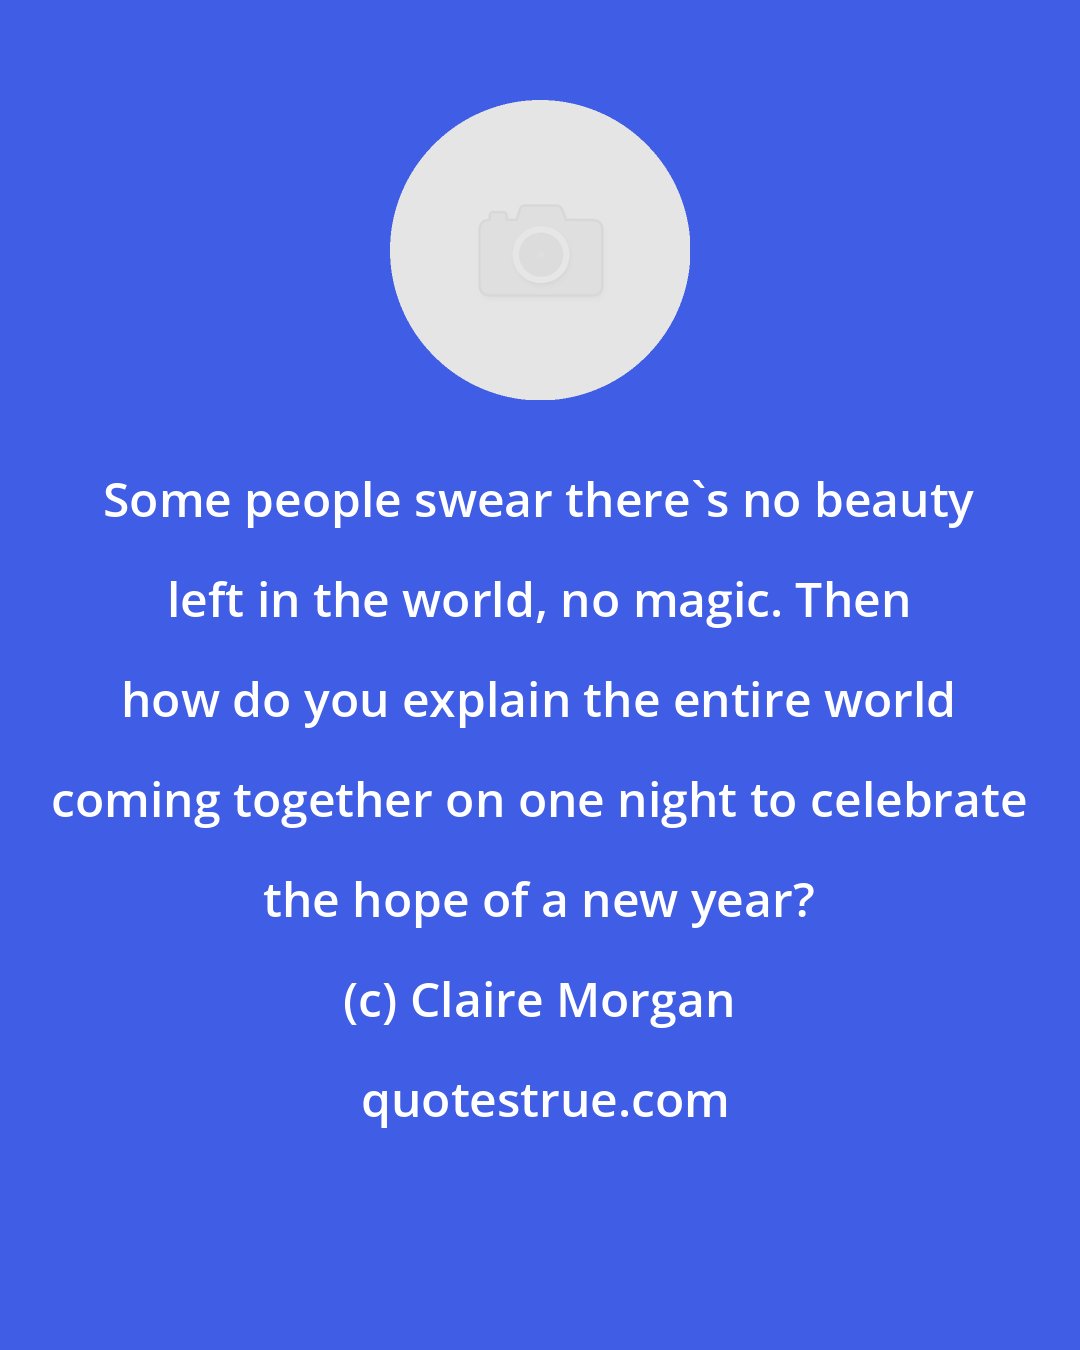 Claire Morgan: Some people swear there's no beauty left in the world, no magic. Then how do you explain the entire world coming together on one night to celebrate the hope of a new year?